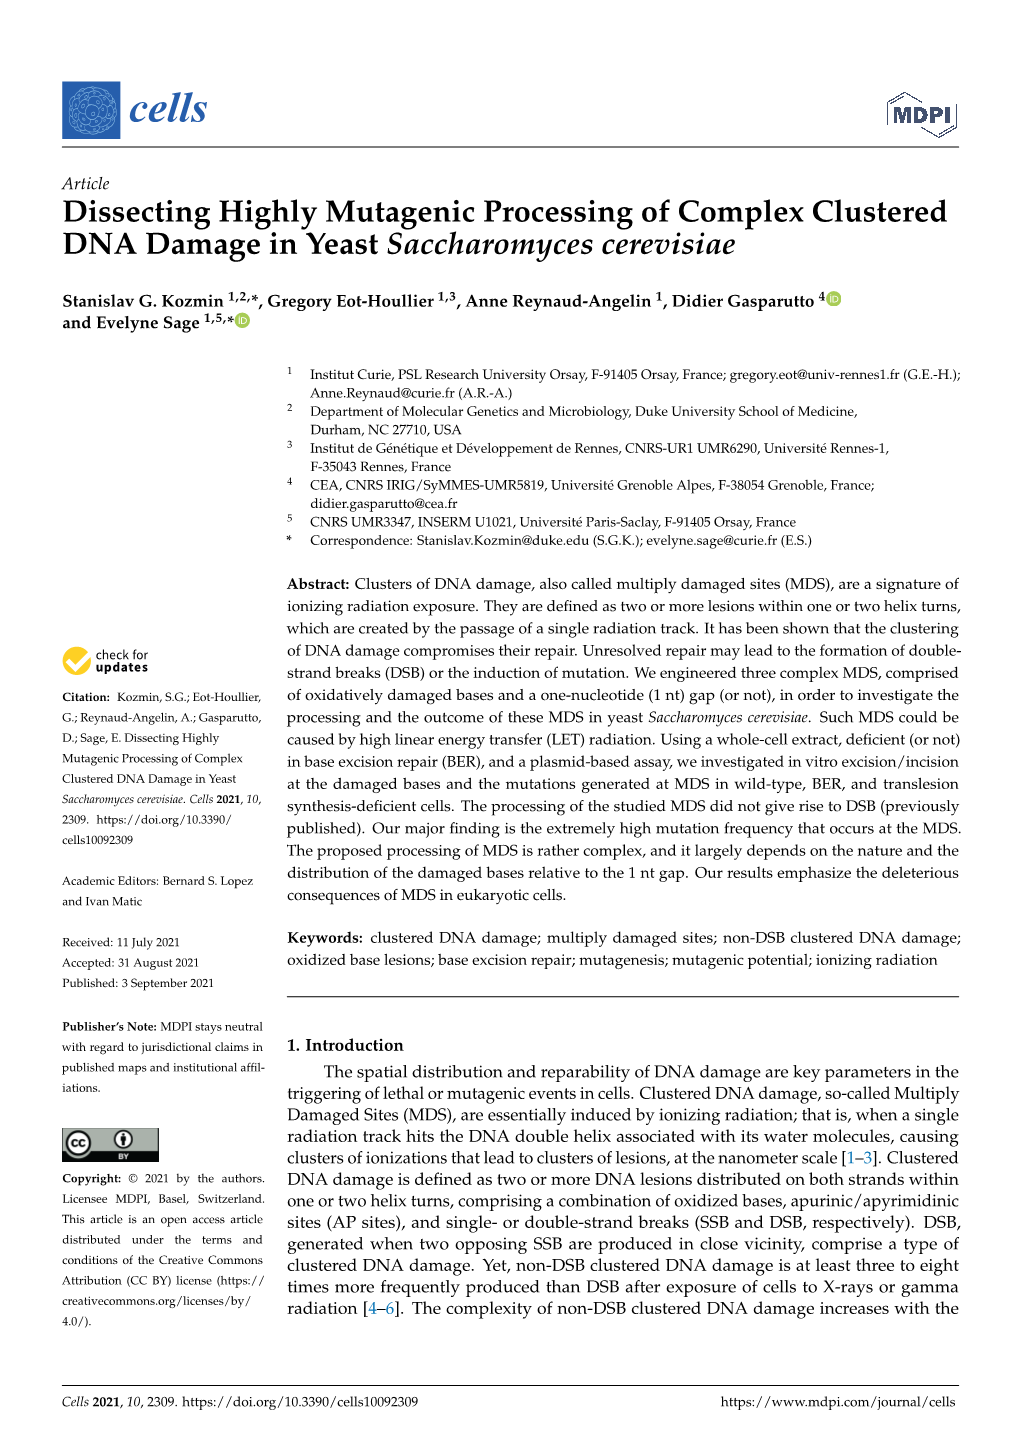 Dissecting Highly Mutagenic Processing of Complex Clustered DNA Damage in Yeast Saccharomyces Cerevisiae